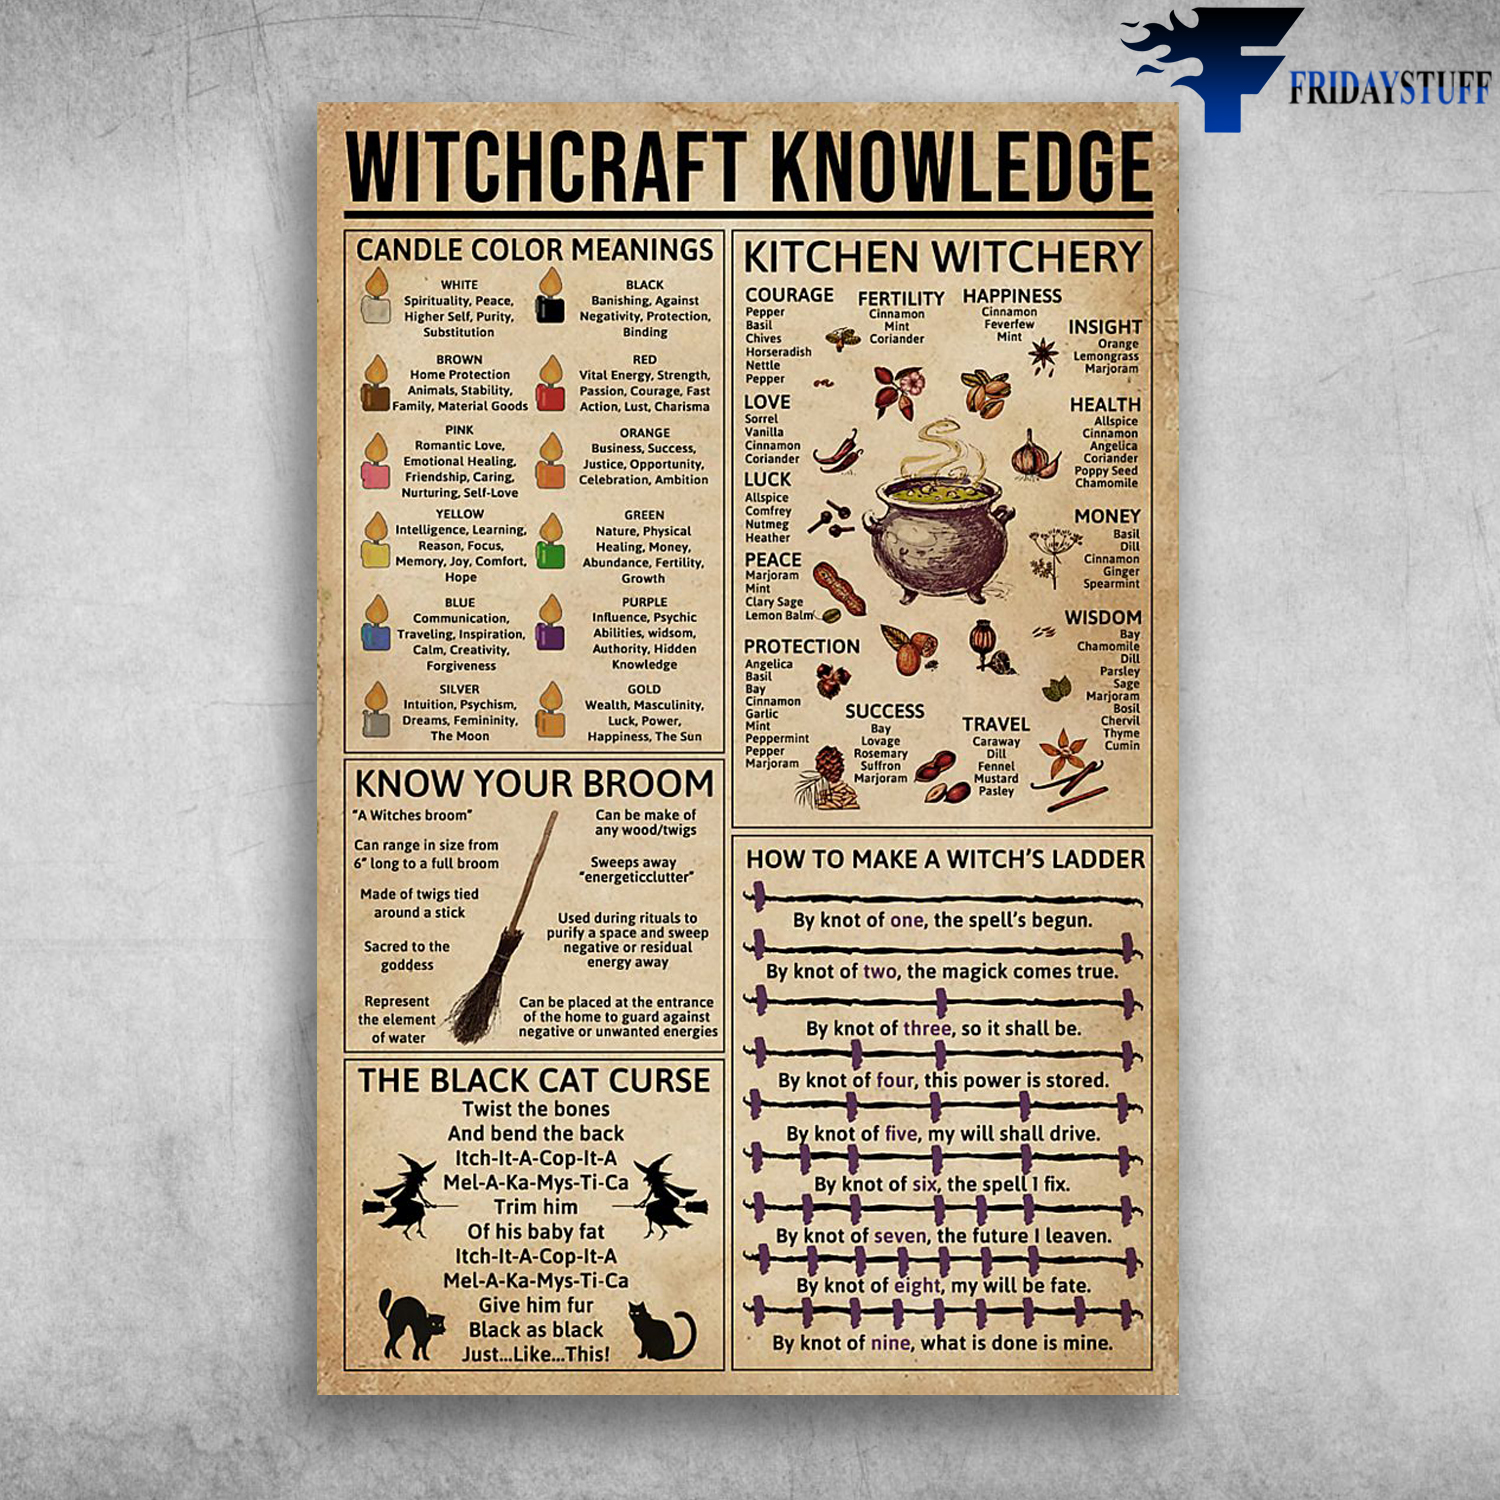 Witchcraft Knowledge Candle Color Meanings Kitchen Witchery